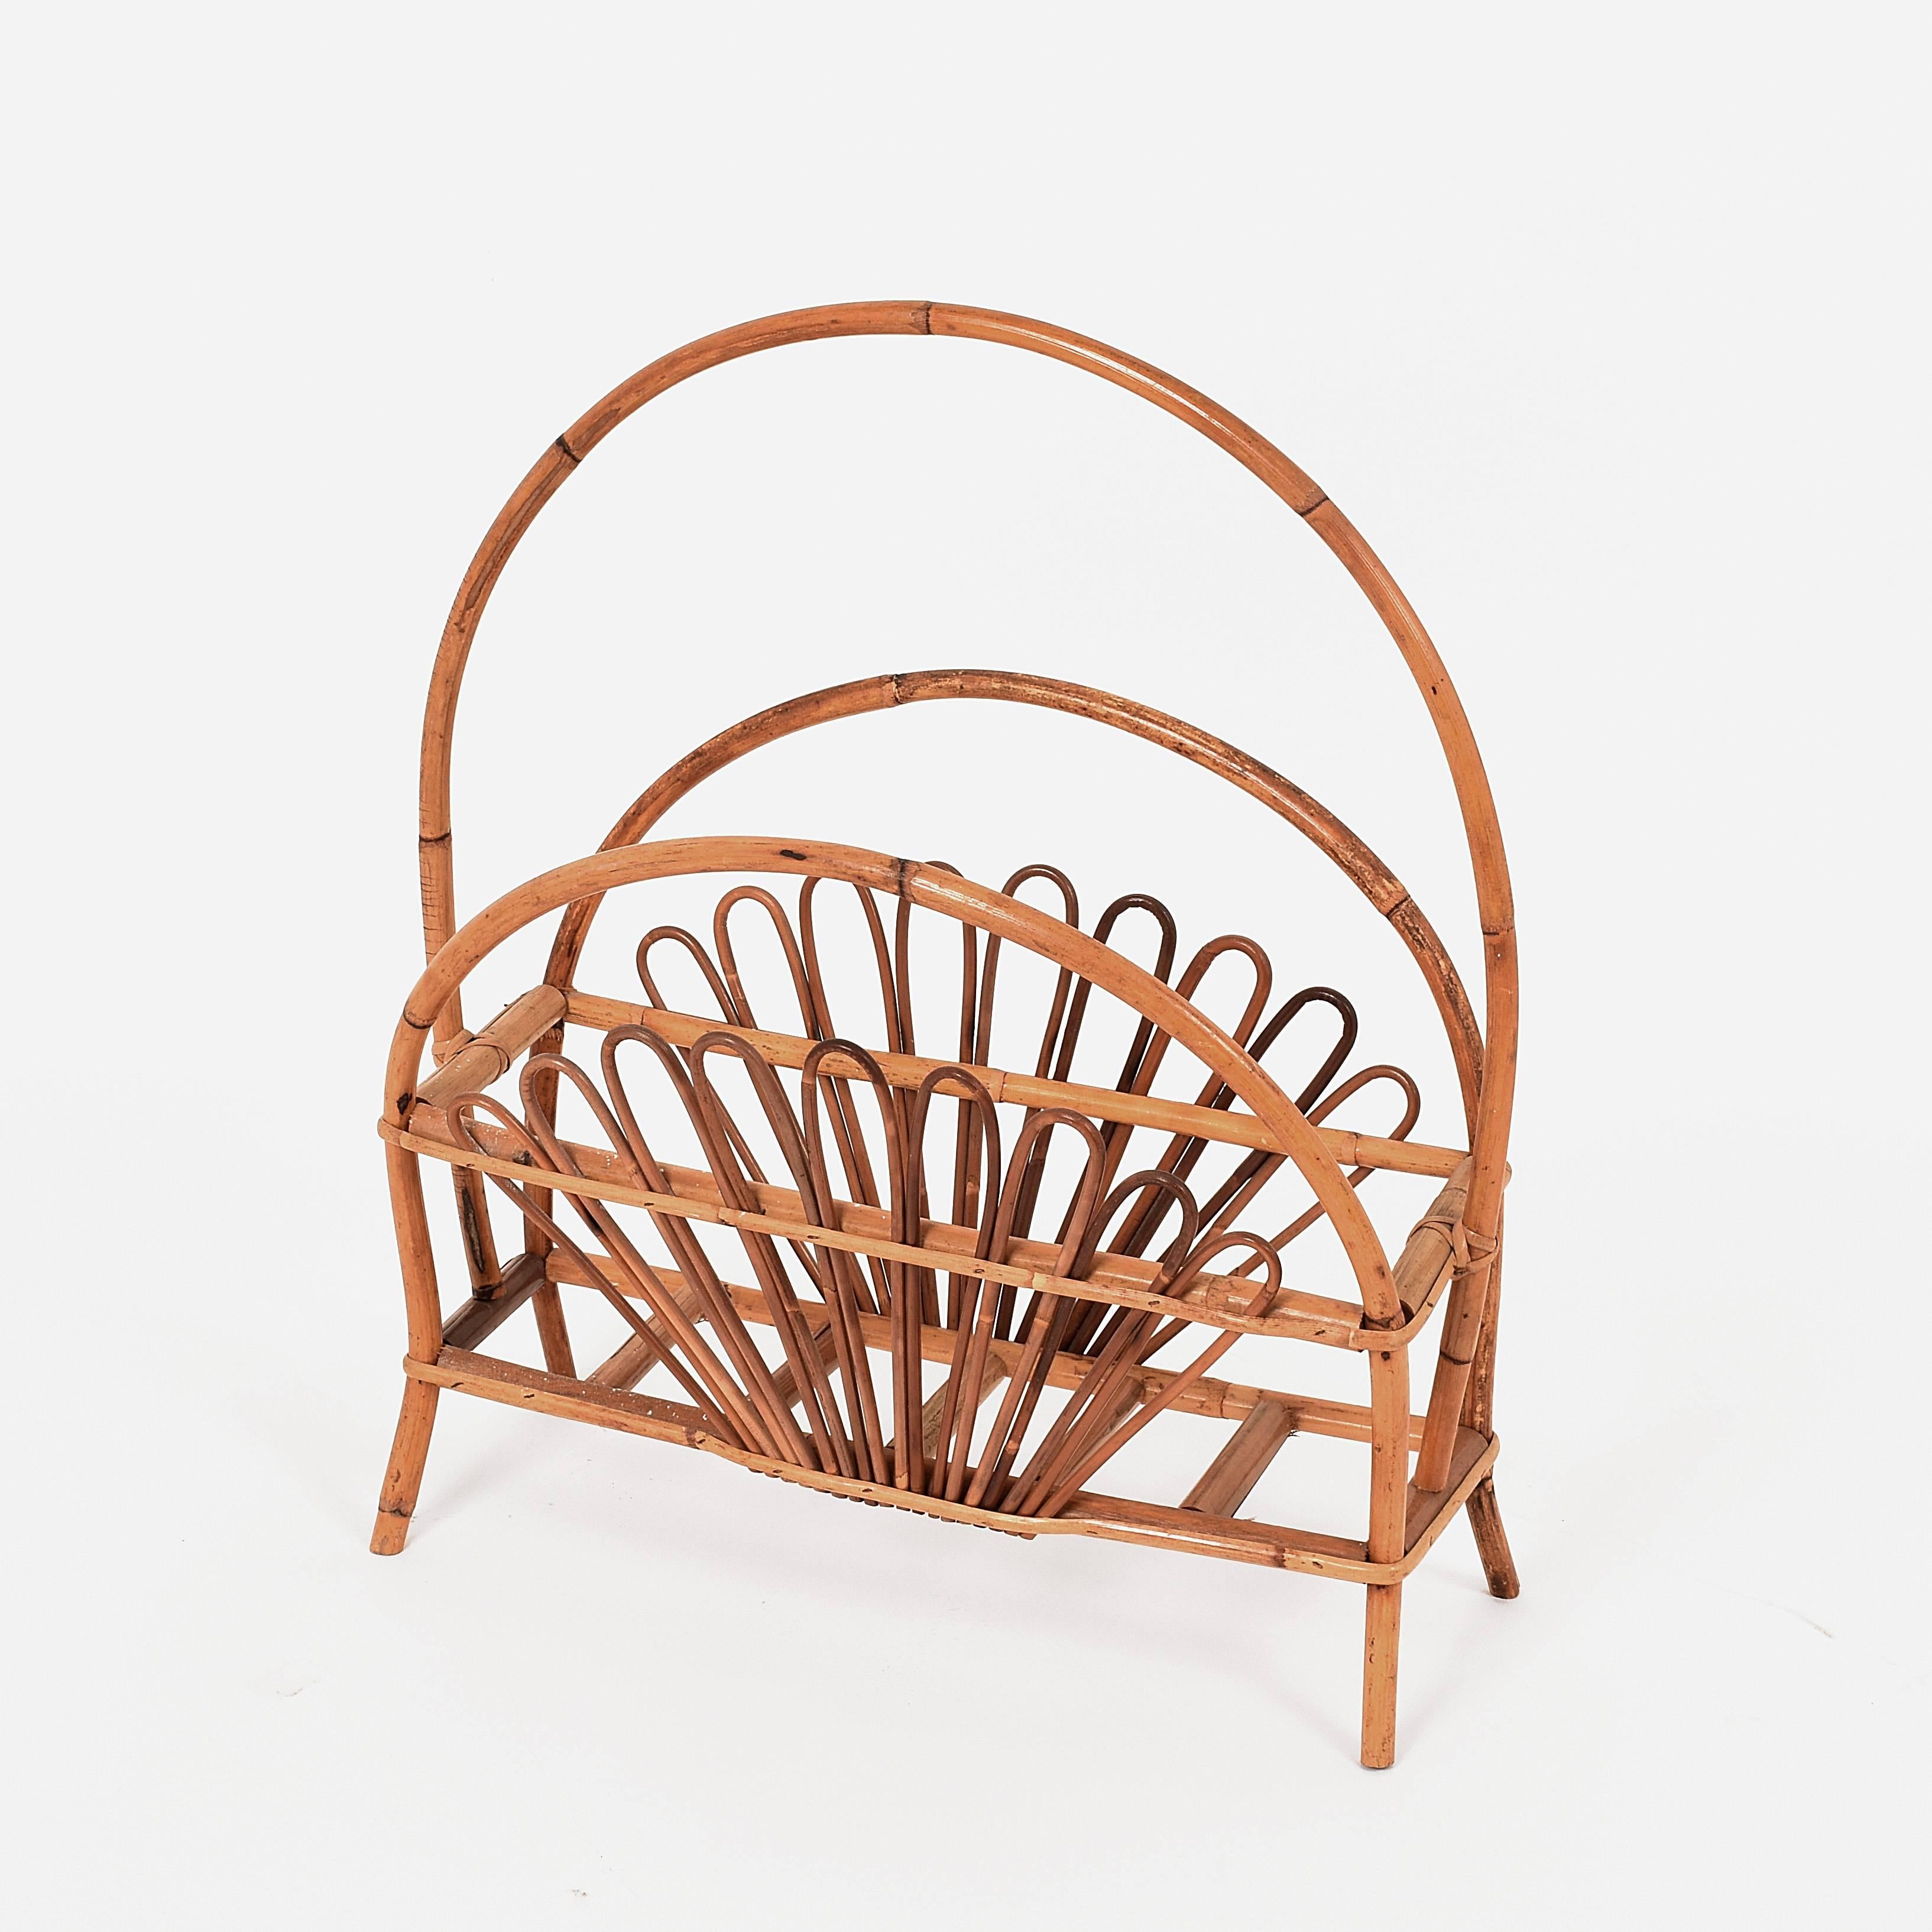 Amazing midcentury French riviera magazine rack in bamboo and rattan.

This wonderful piece was produced in Italy during the 1960s.

A great piece that will complete a midcentury-style living room or studio.